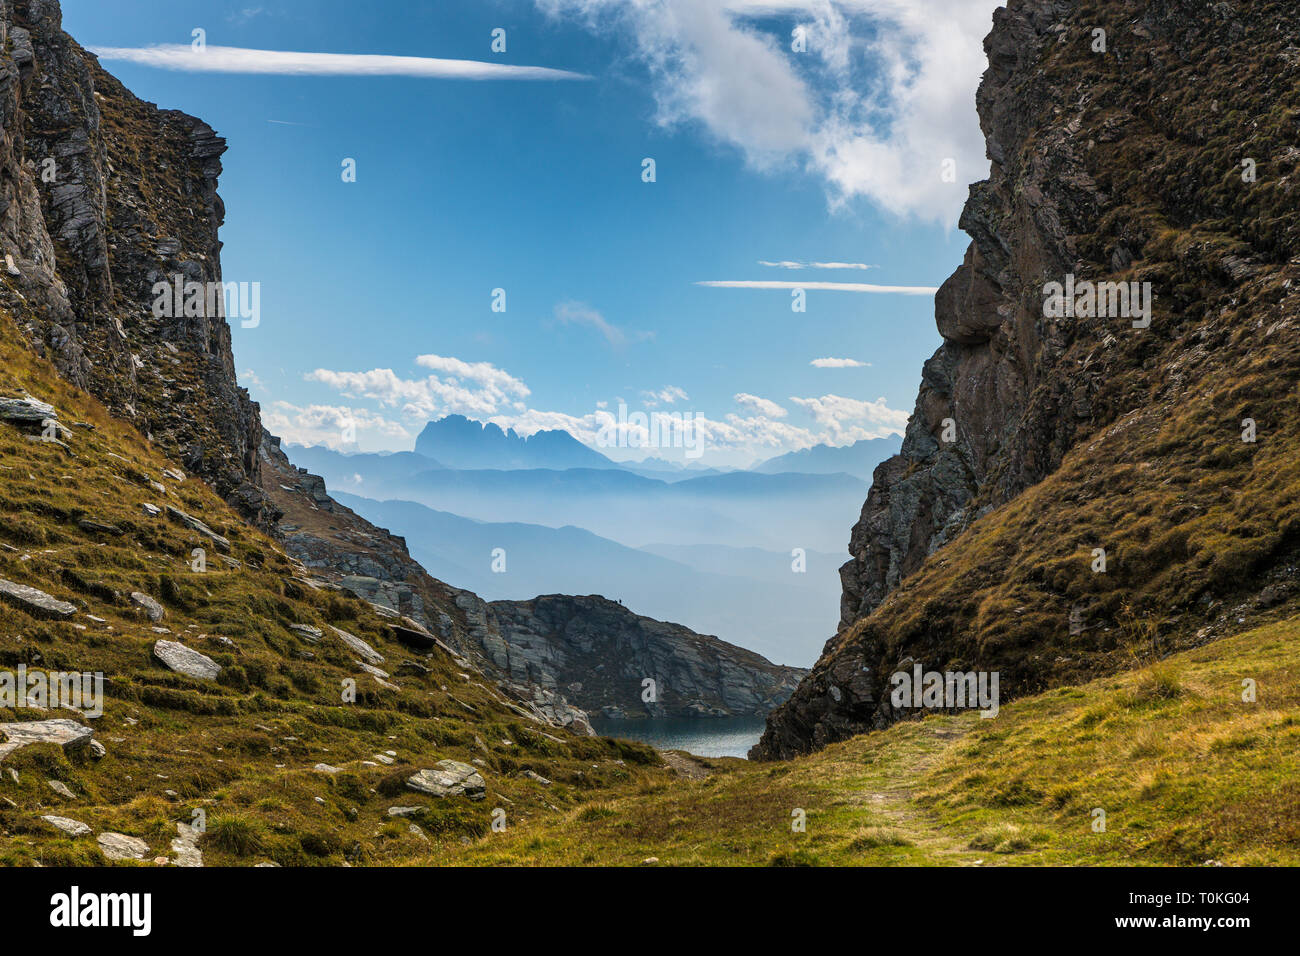 Hike to the Seefeldspitze, view to the Langkofelgruppe and Seefeldsee, Valser Tal, Pfunderer Mountains, South Tyrol, Italy Stock Photo